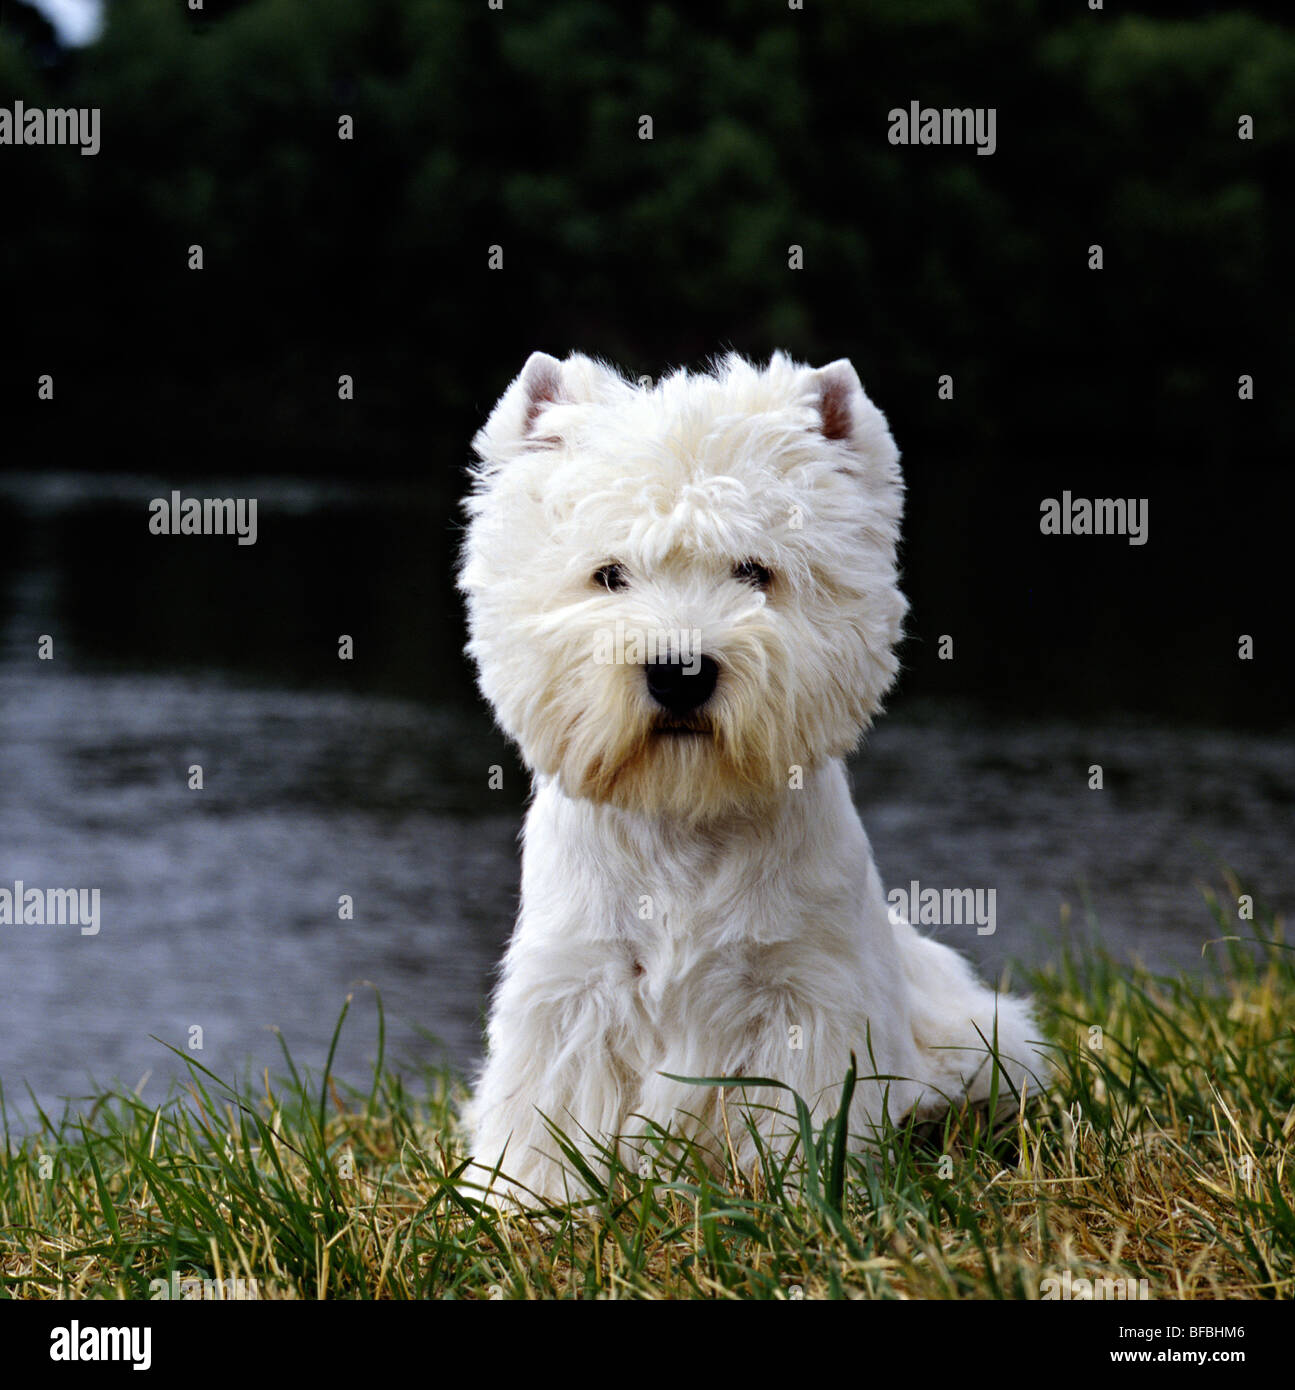 West Highland White Terrier, campione olac moon pilota, best in show Crufts 1990 Foto Stock